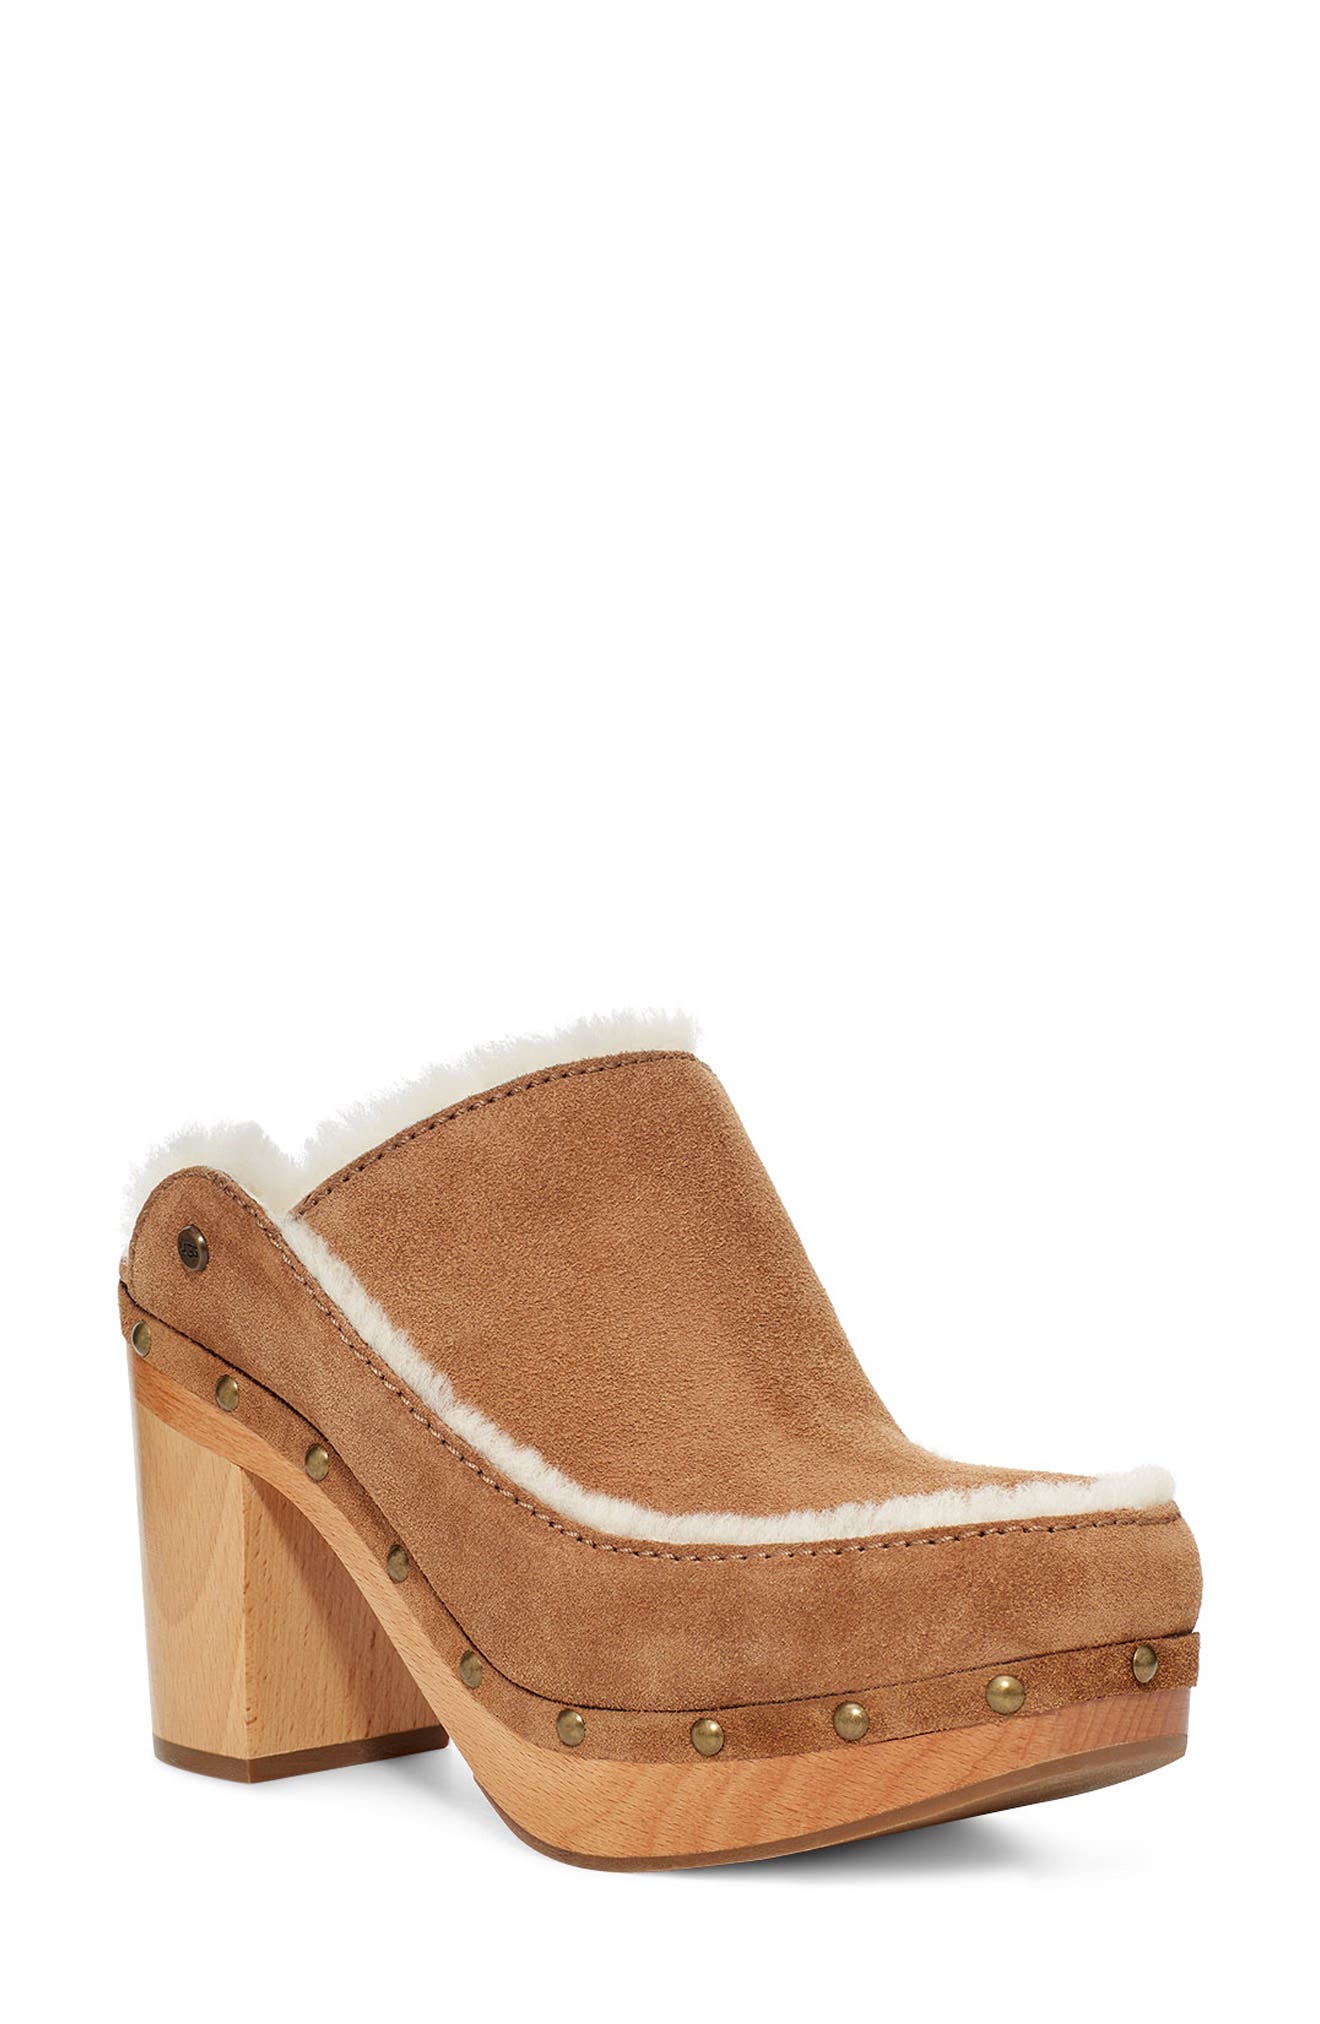 ugg clogs clearance